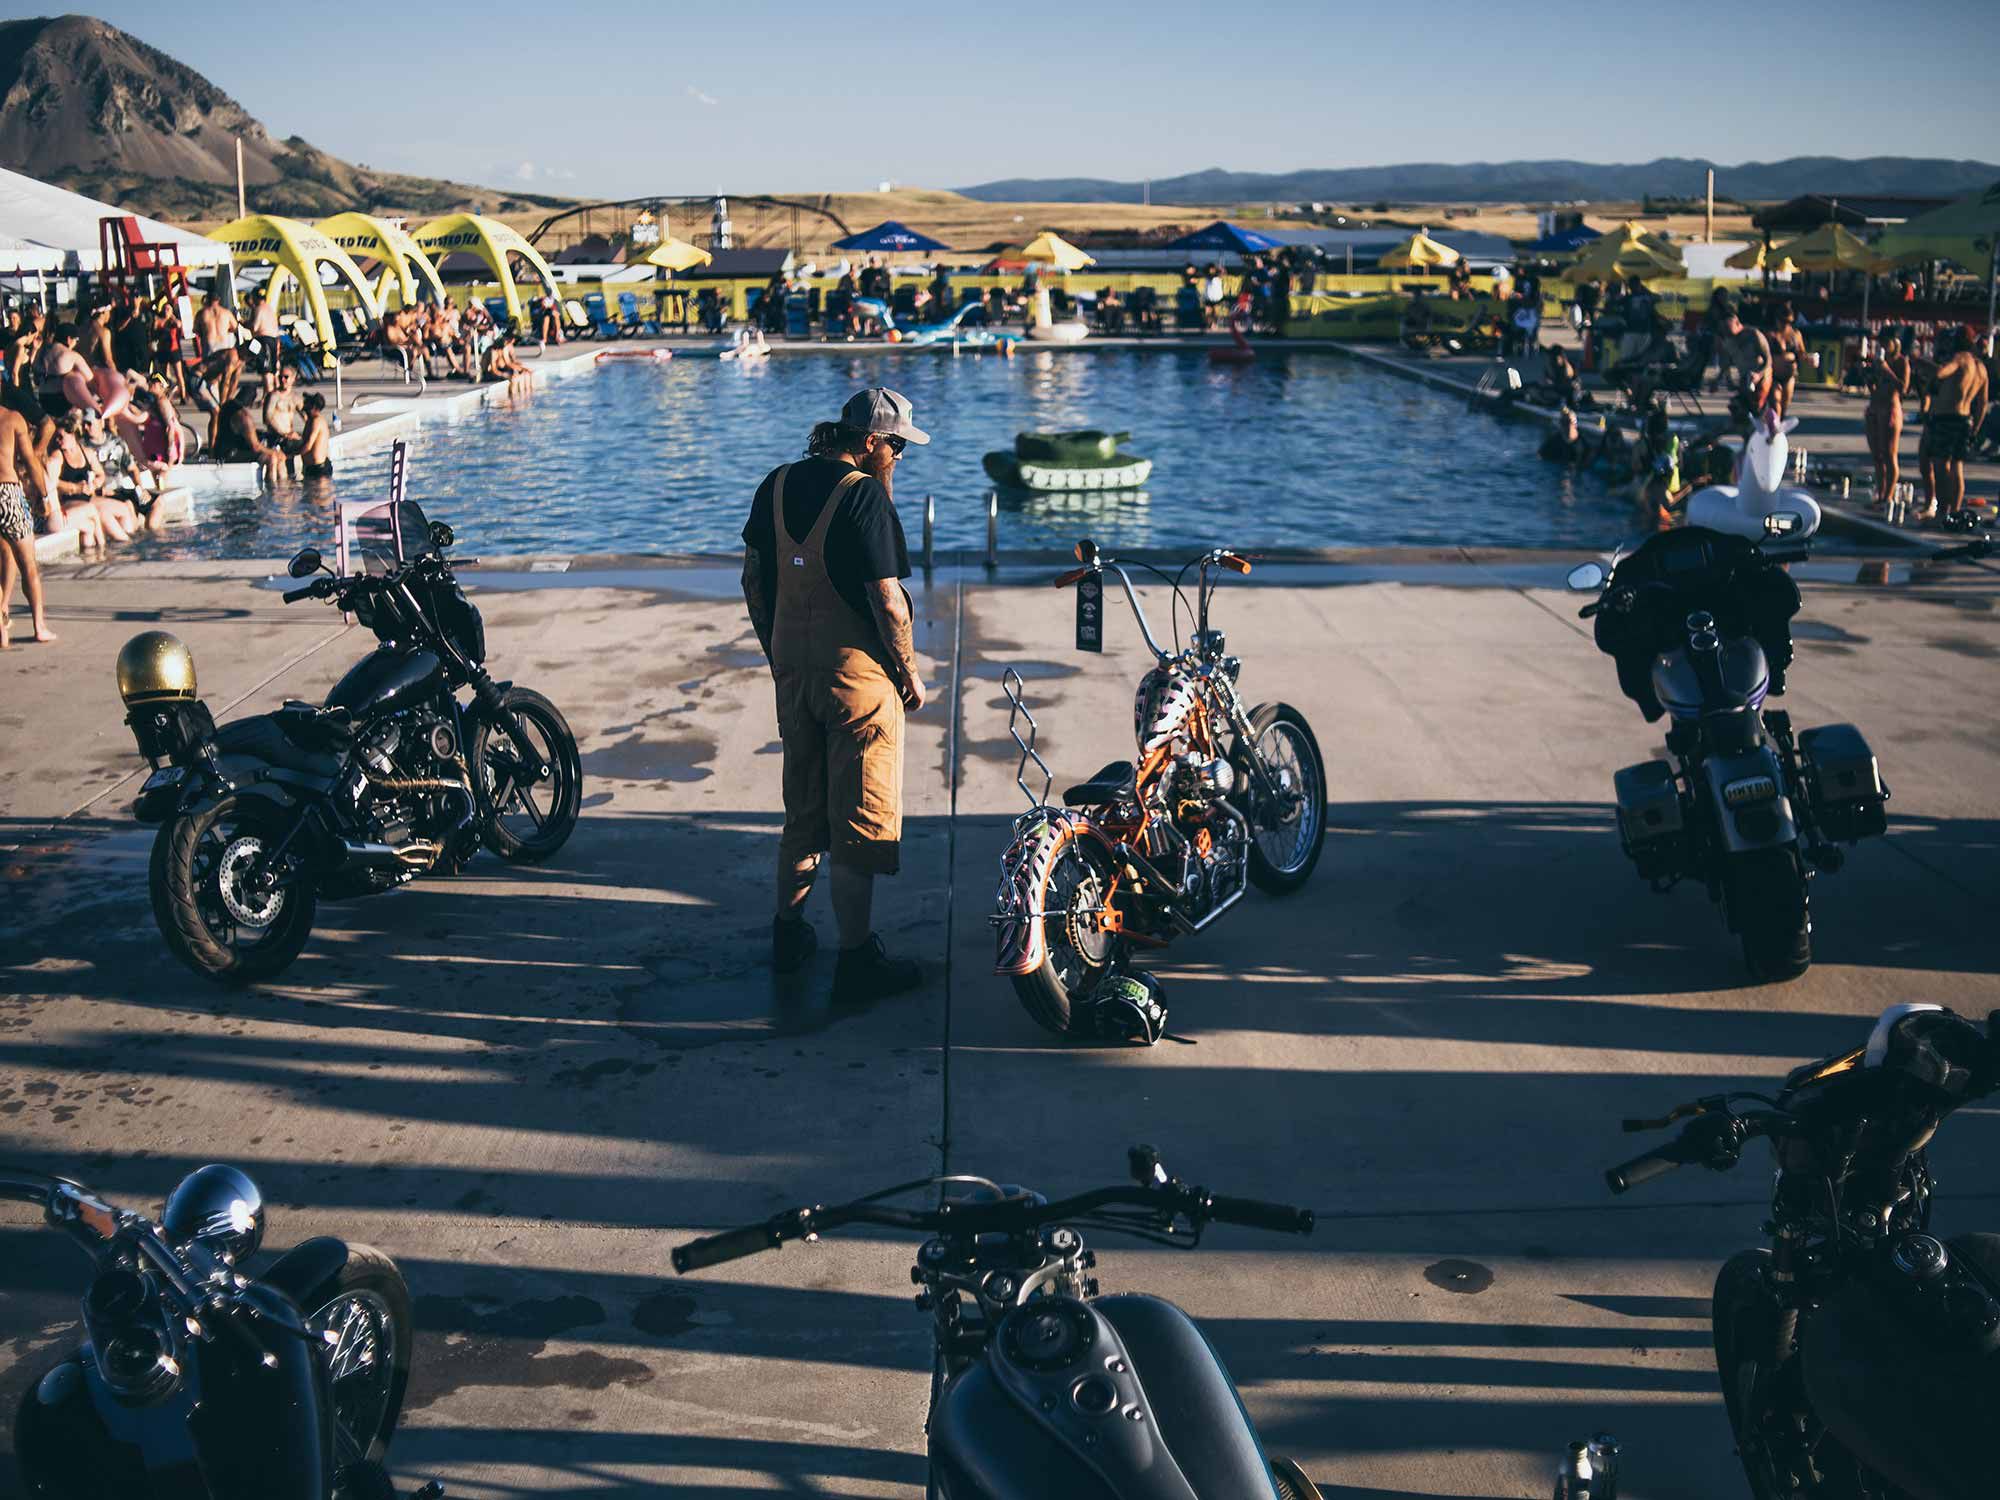 Is there anywhere bikes can’t park at Sturgis? Poolside parking.